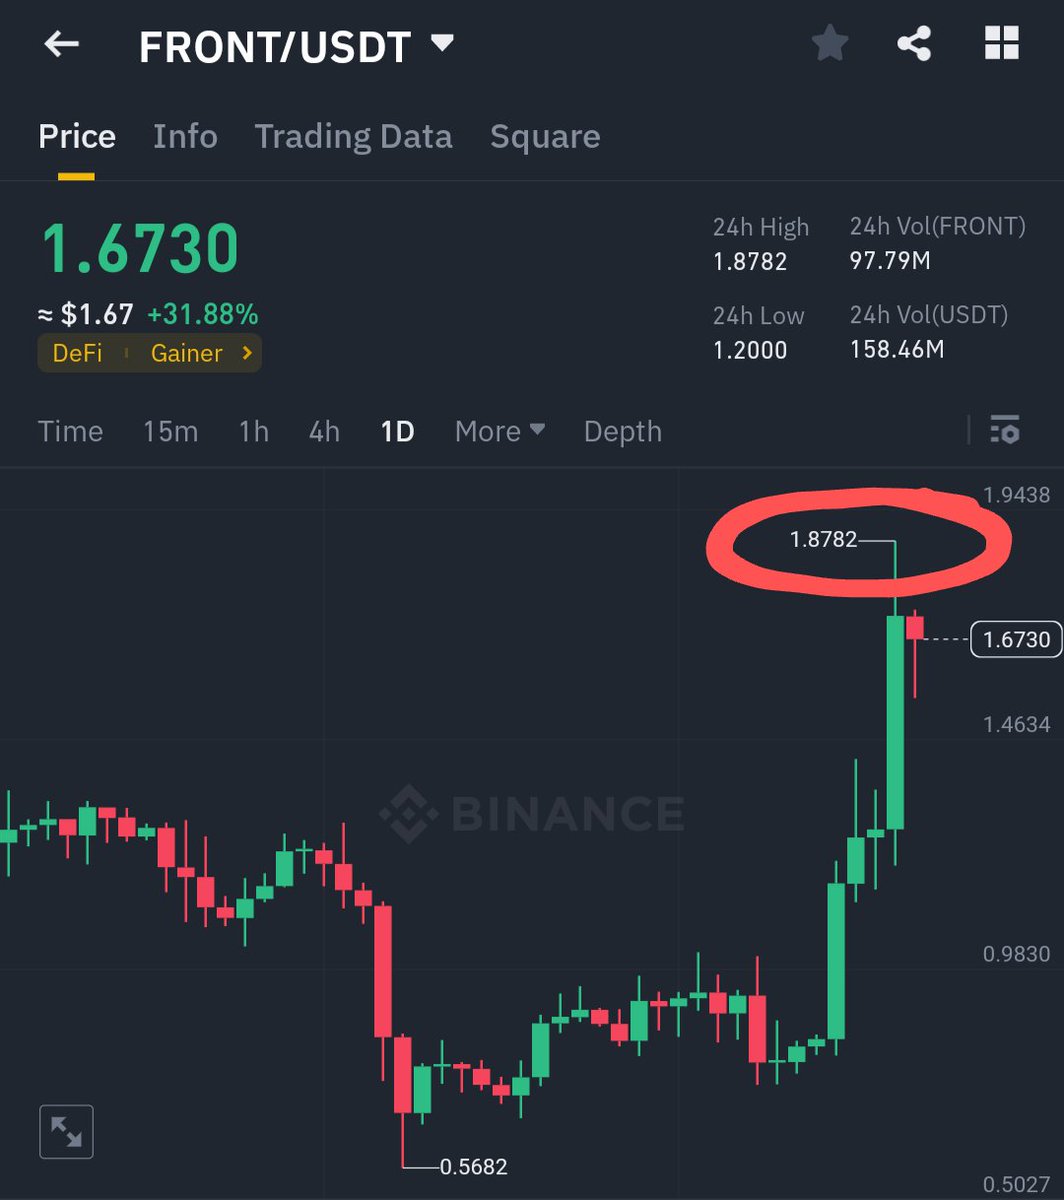 #FRONT again on the move, and today it is the highest gainer on #Binance 🔥   Today, it hit $1.9, i.e., a 𝟑𝐱 profit for us 🚀 It's always a money-making season for the WA community 🤑